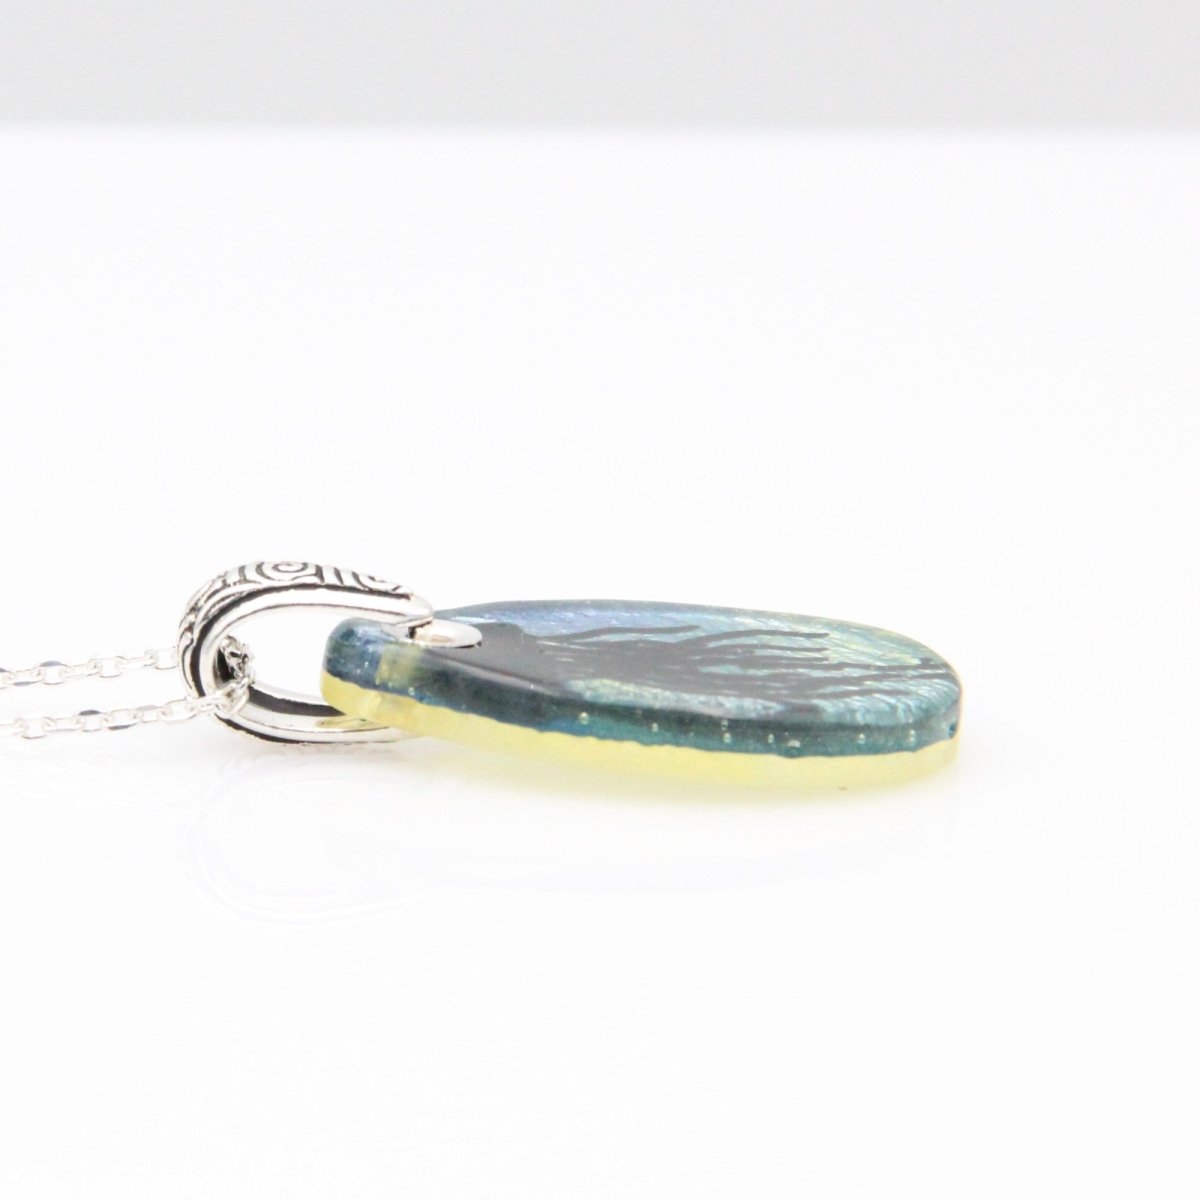 Blue and Green Jellyfish Glass Pendant on a Silver Chain